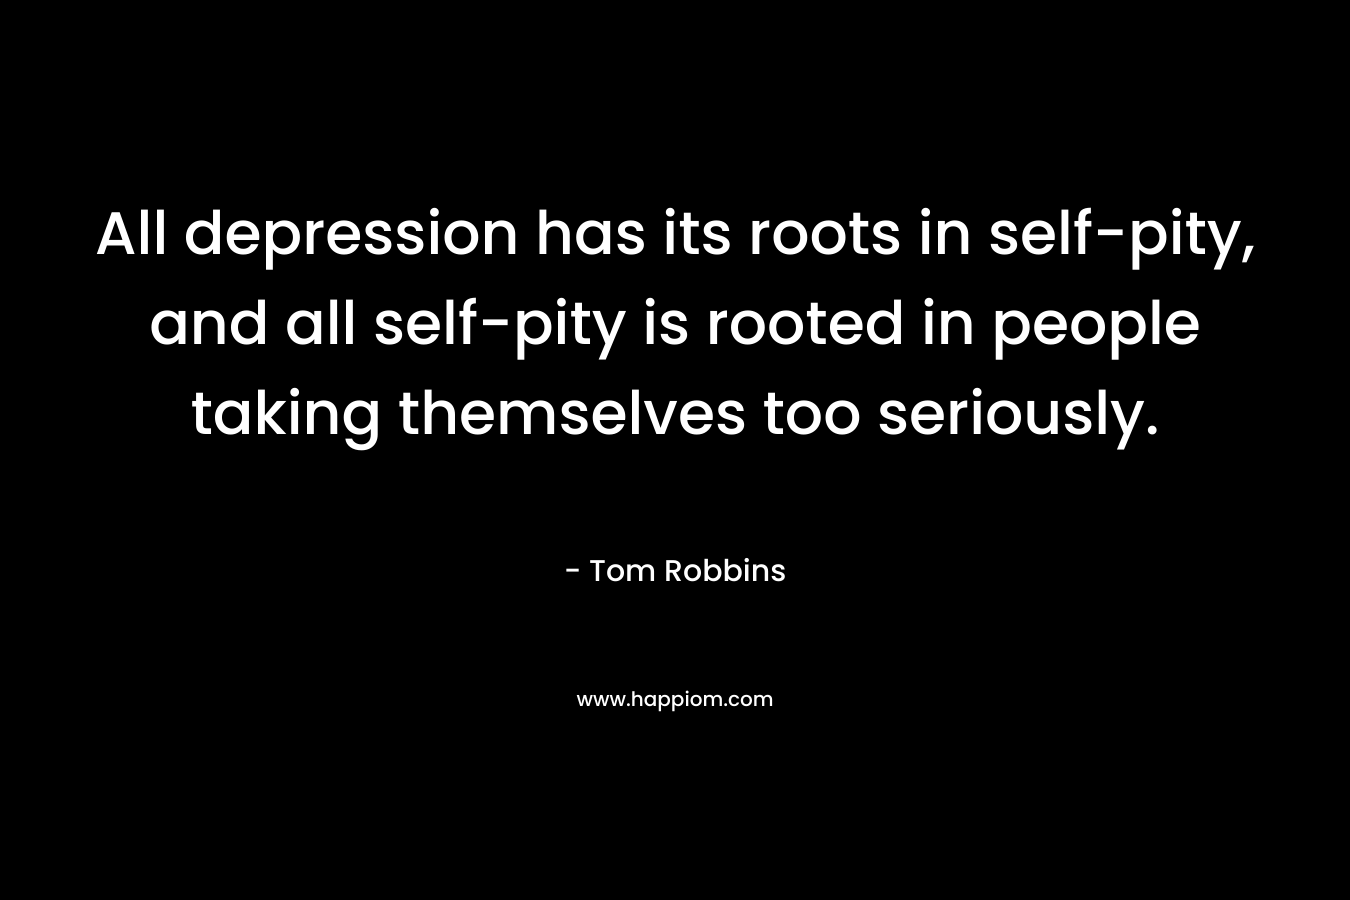 All depression has its roots in self-pity, and all self-pity is rooted in people taking themselves too seriously.